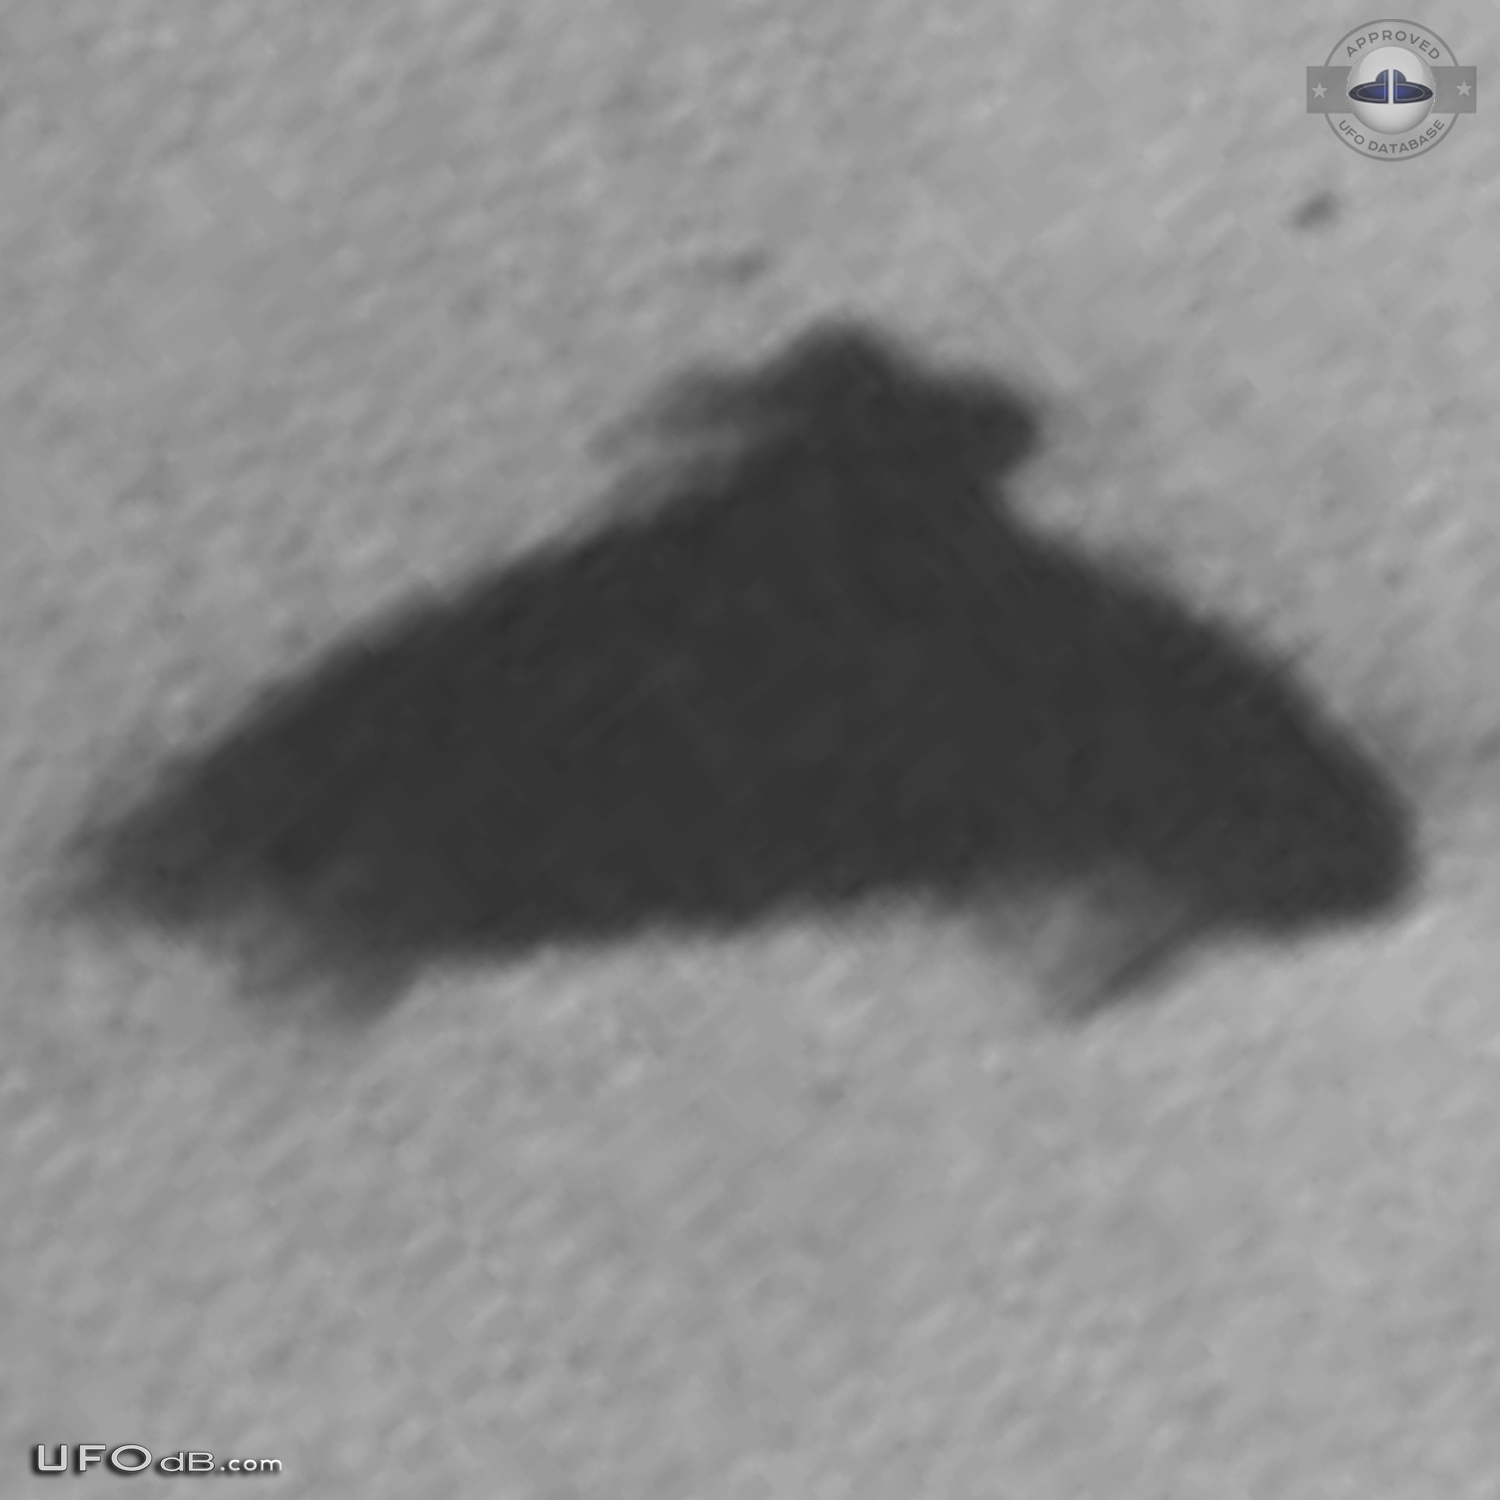 Bell Shaped UFO caught on picture in May 1975 in Chiba, Japan - Asia UFO Picture #447-4